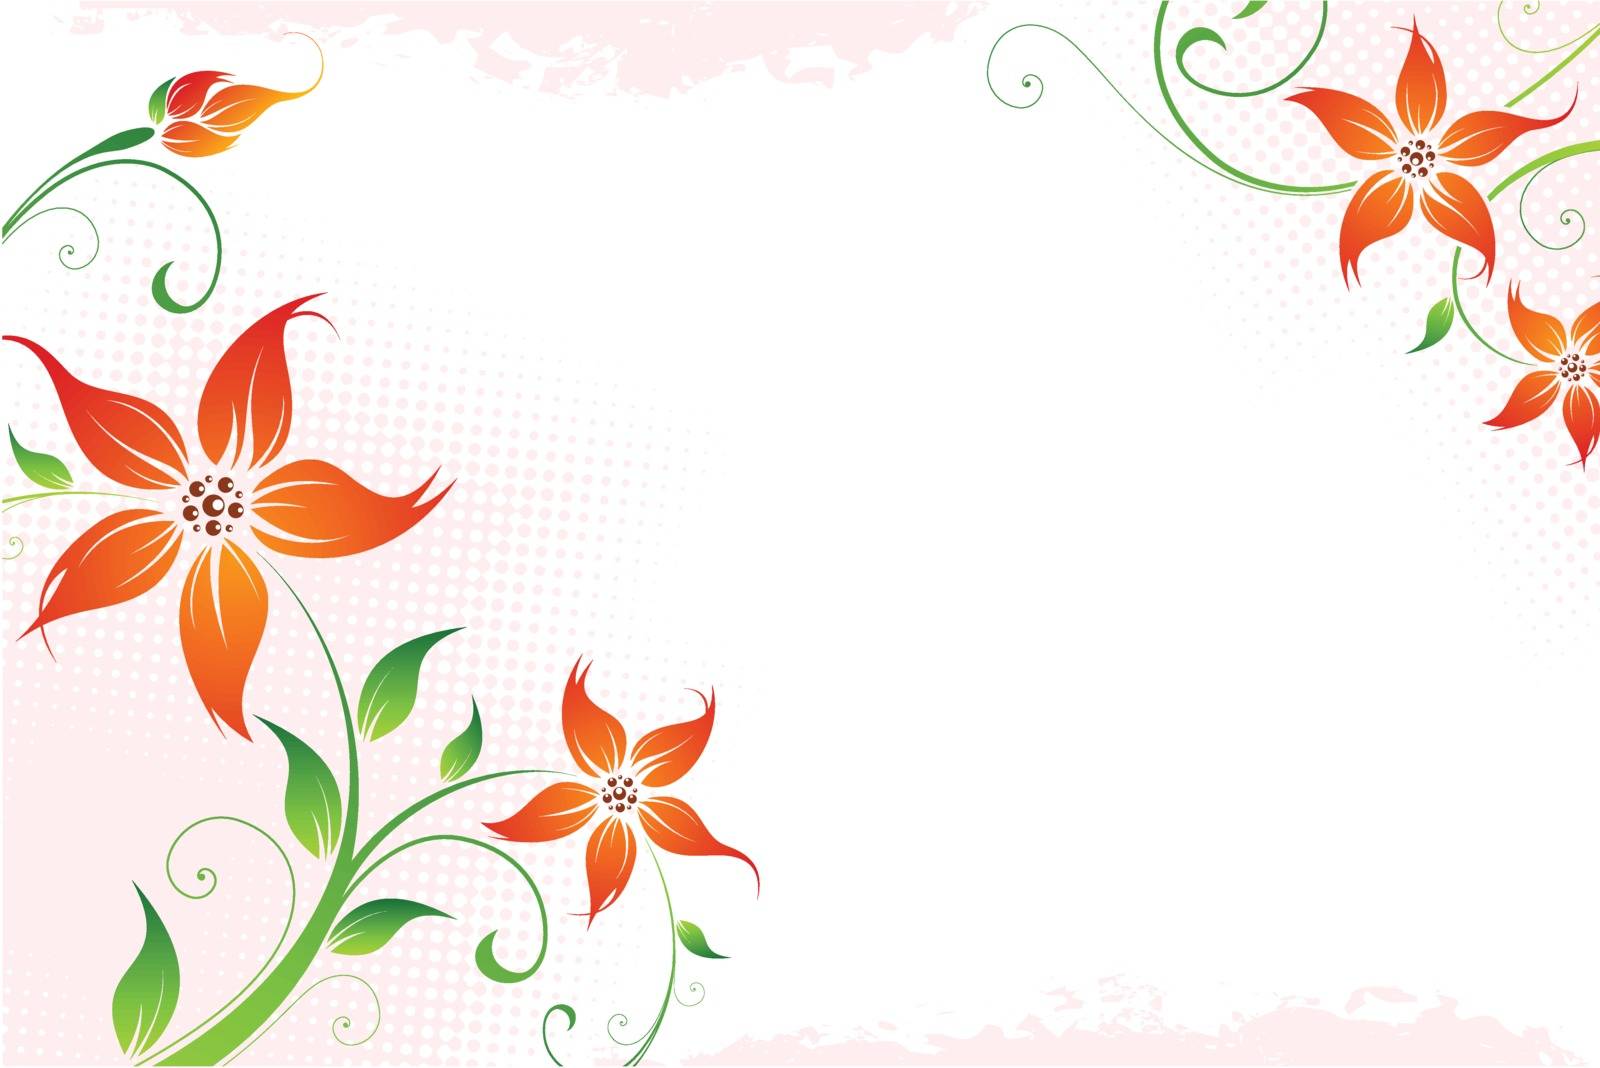 Flowers on grunge pink background for your design